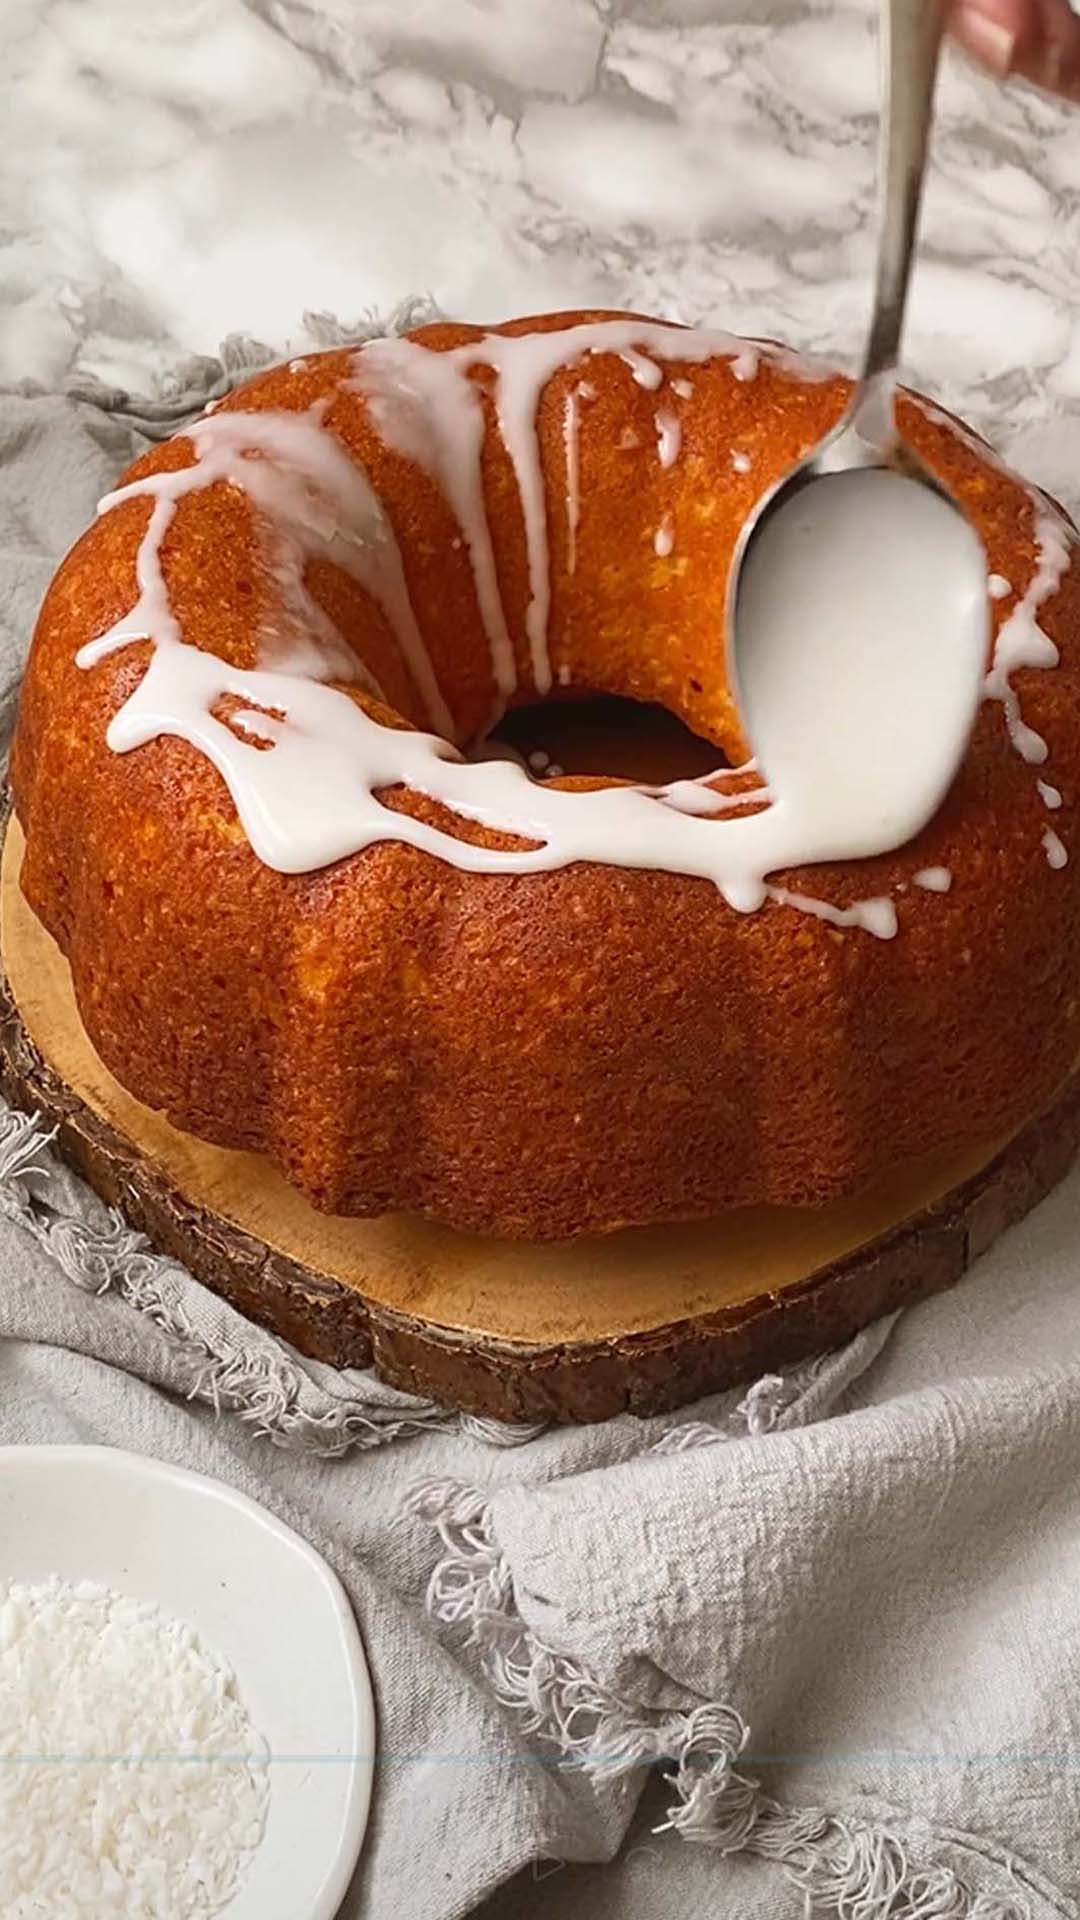 Adding icing on top of a bundt cake.